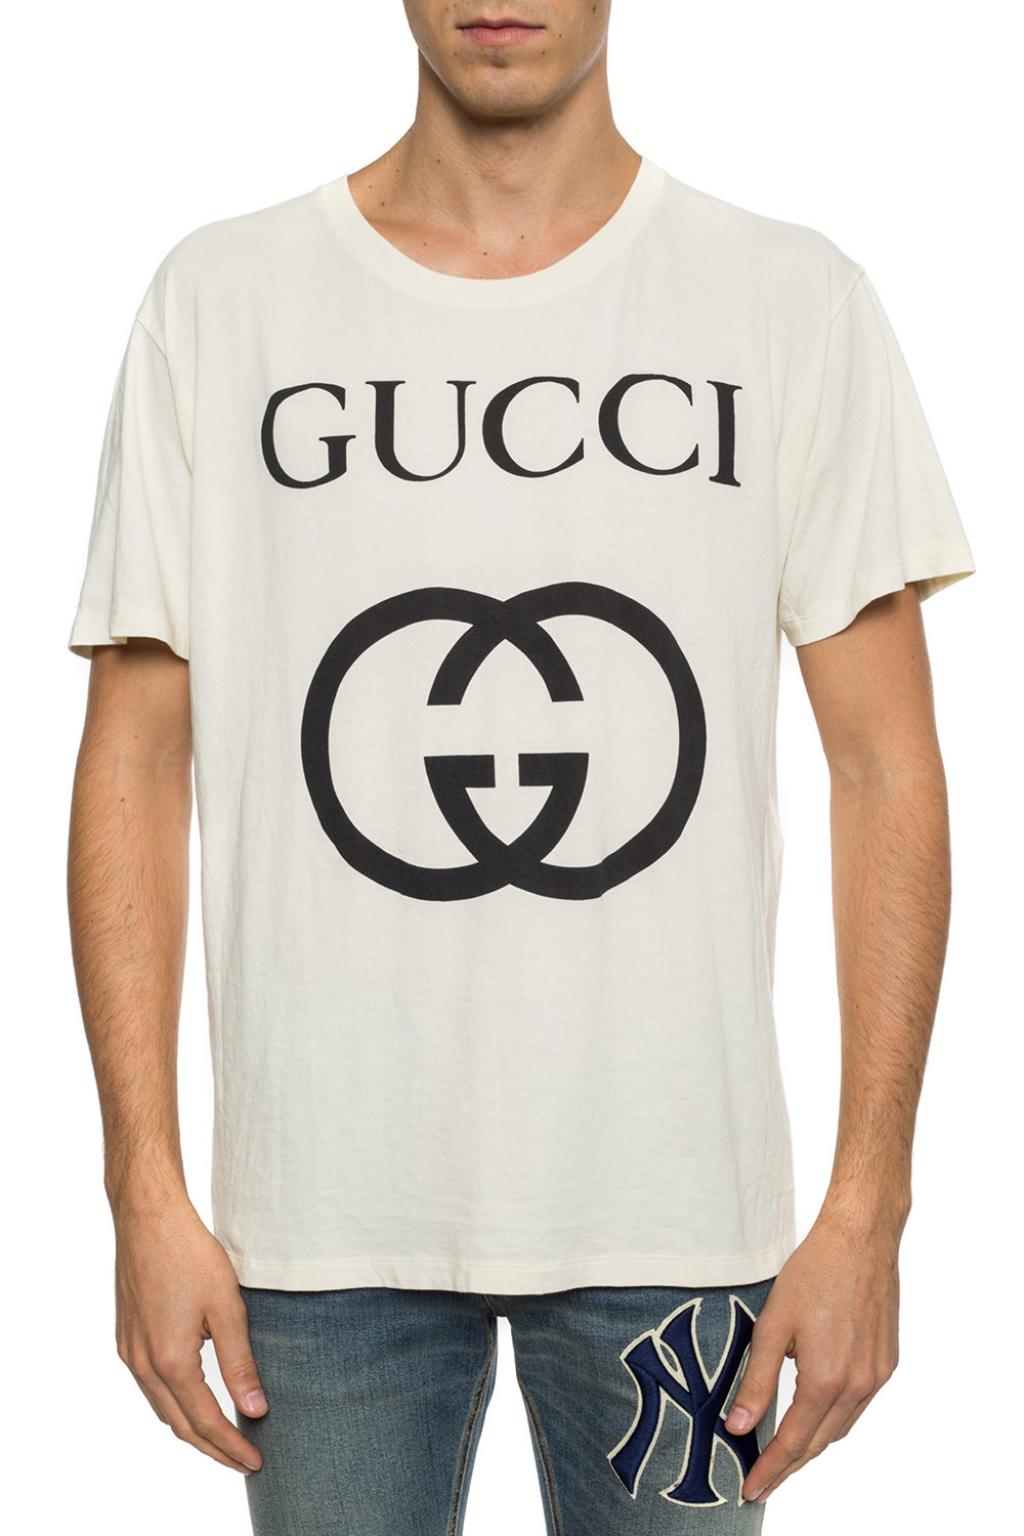 🤯DESIGNER AVAILABLE🤯 GUCCI T-SHIRT “BLACK LOGO” BRAND NEW SIZE M $400  (RETAIL IS $490 BEFORE TAXES & SHIPPING)